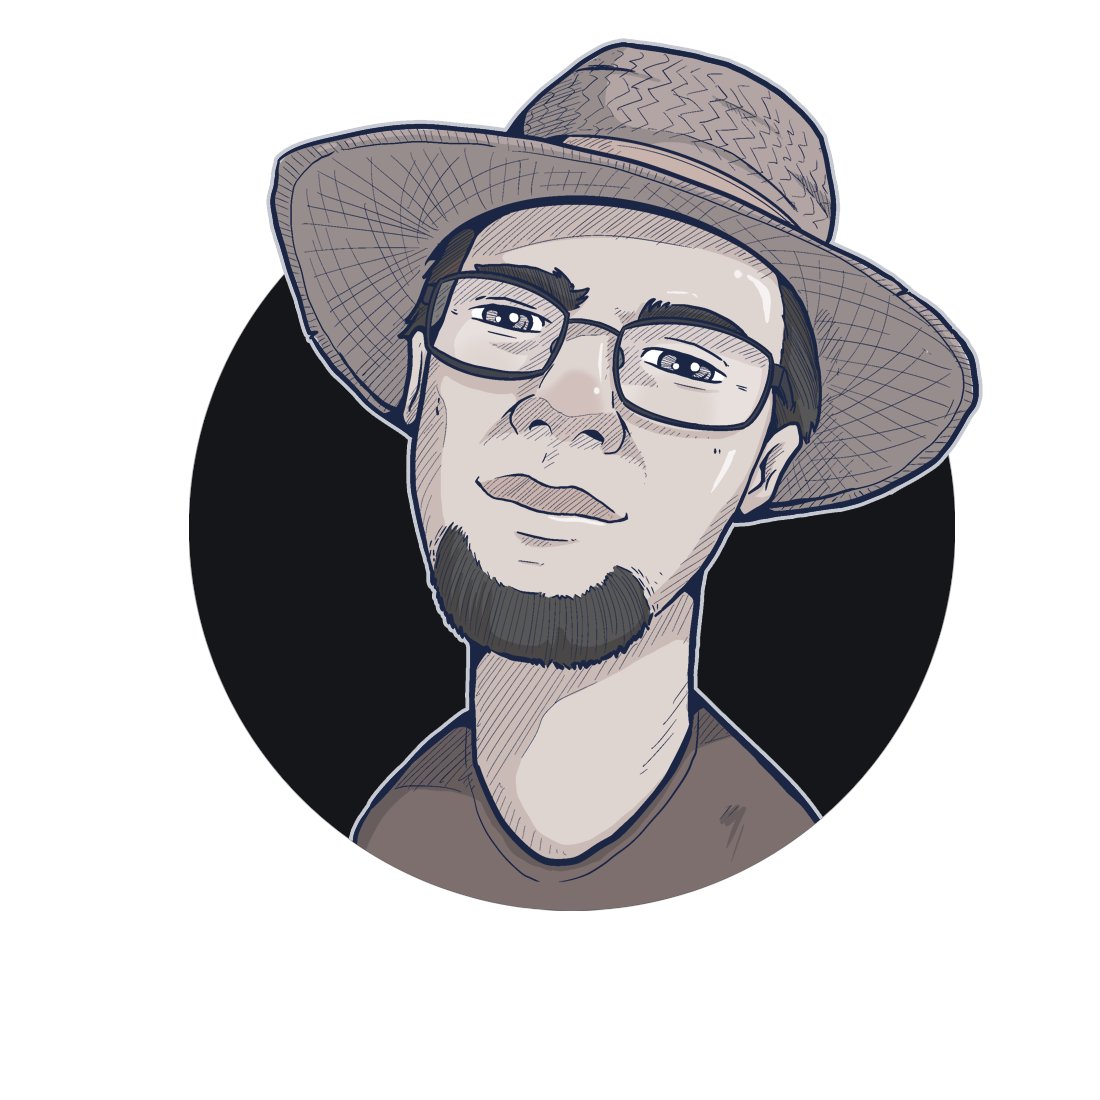 GM Ajunians, meet Didac 🇪🇸 Didac is a Senior Rust Developer and works on the backend engineering team🔥 He has been working hard on Ajuna Network for the past 2 years 💪 Make sure to show him some love in the comments ⤵️ #Blockchain #Gaming #Dev